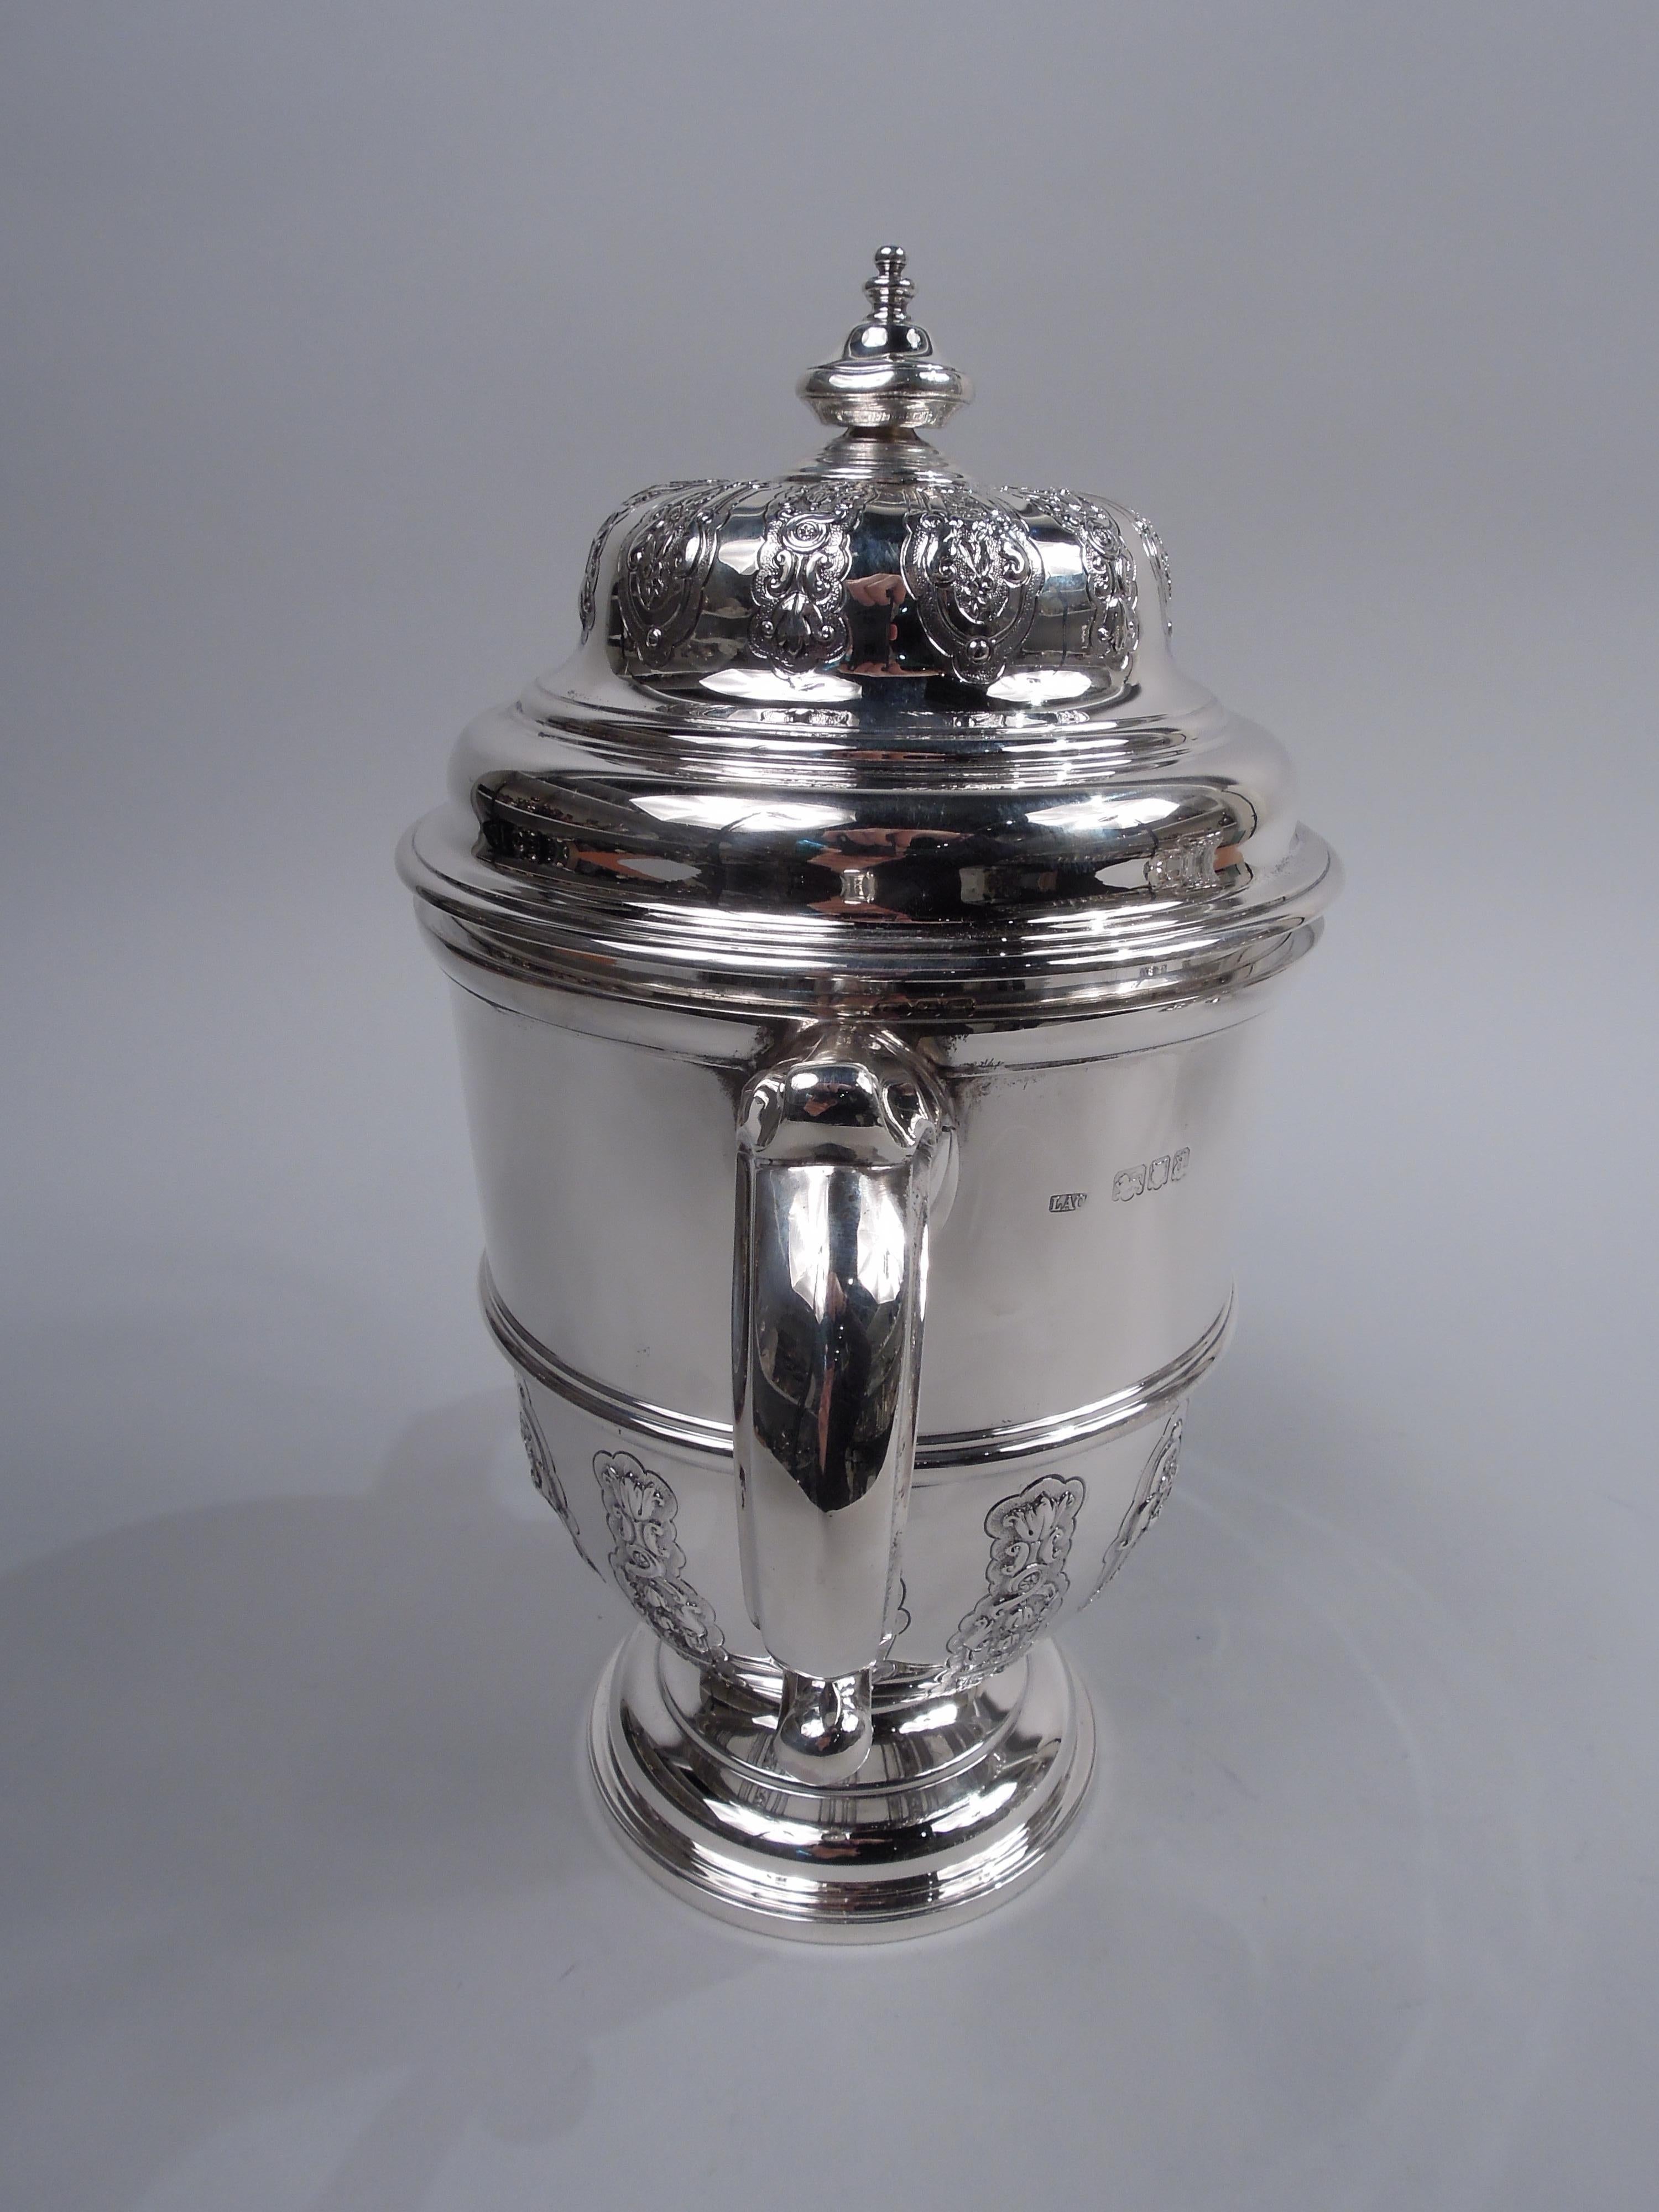 Neoclassical Revival Crichton English Neoclassical Sterling Silver Covered Urn 1916 For Sale